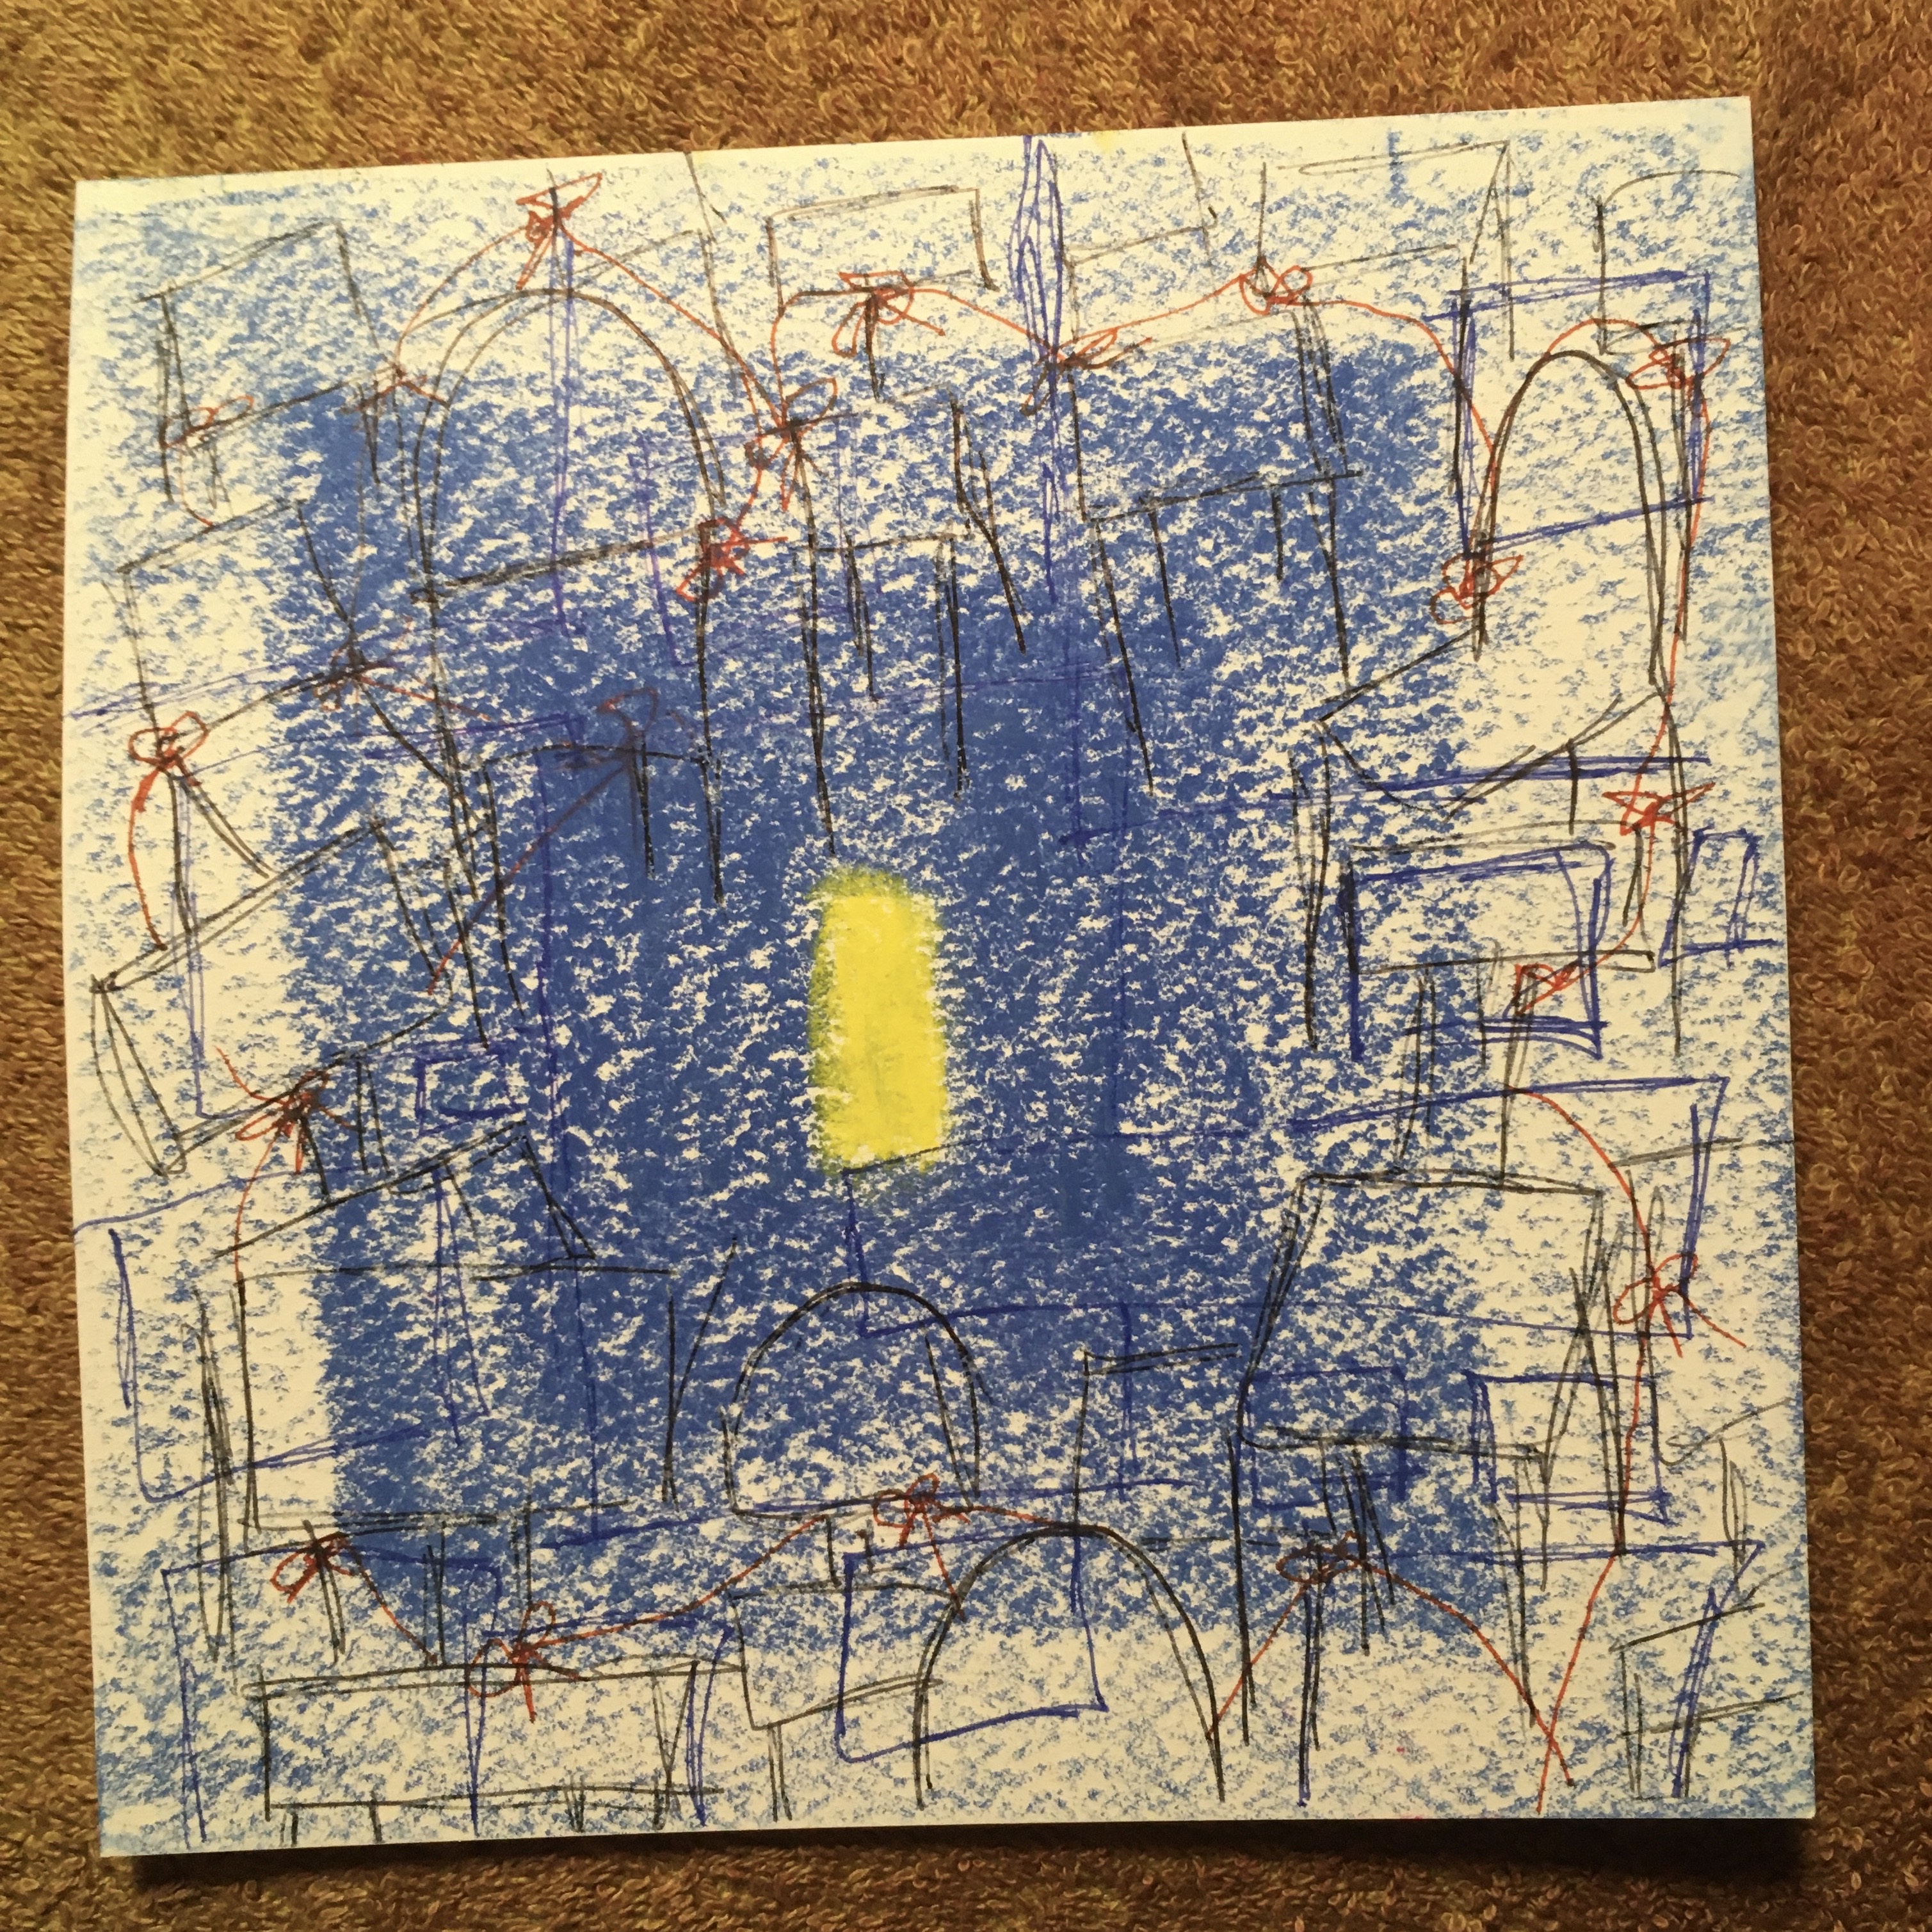 An abstract pastel drawing of a Quaker meeting.